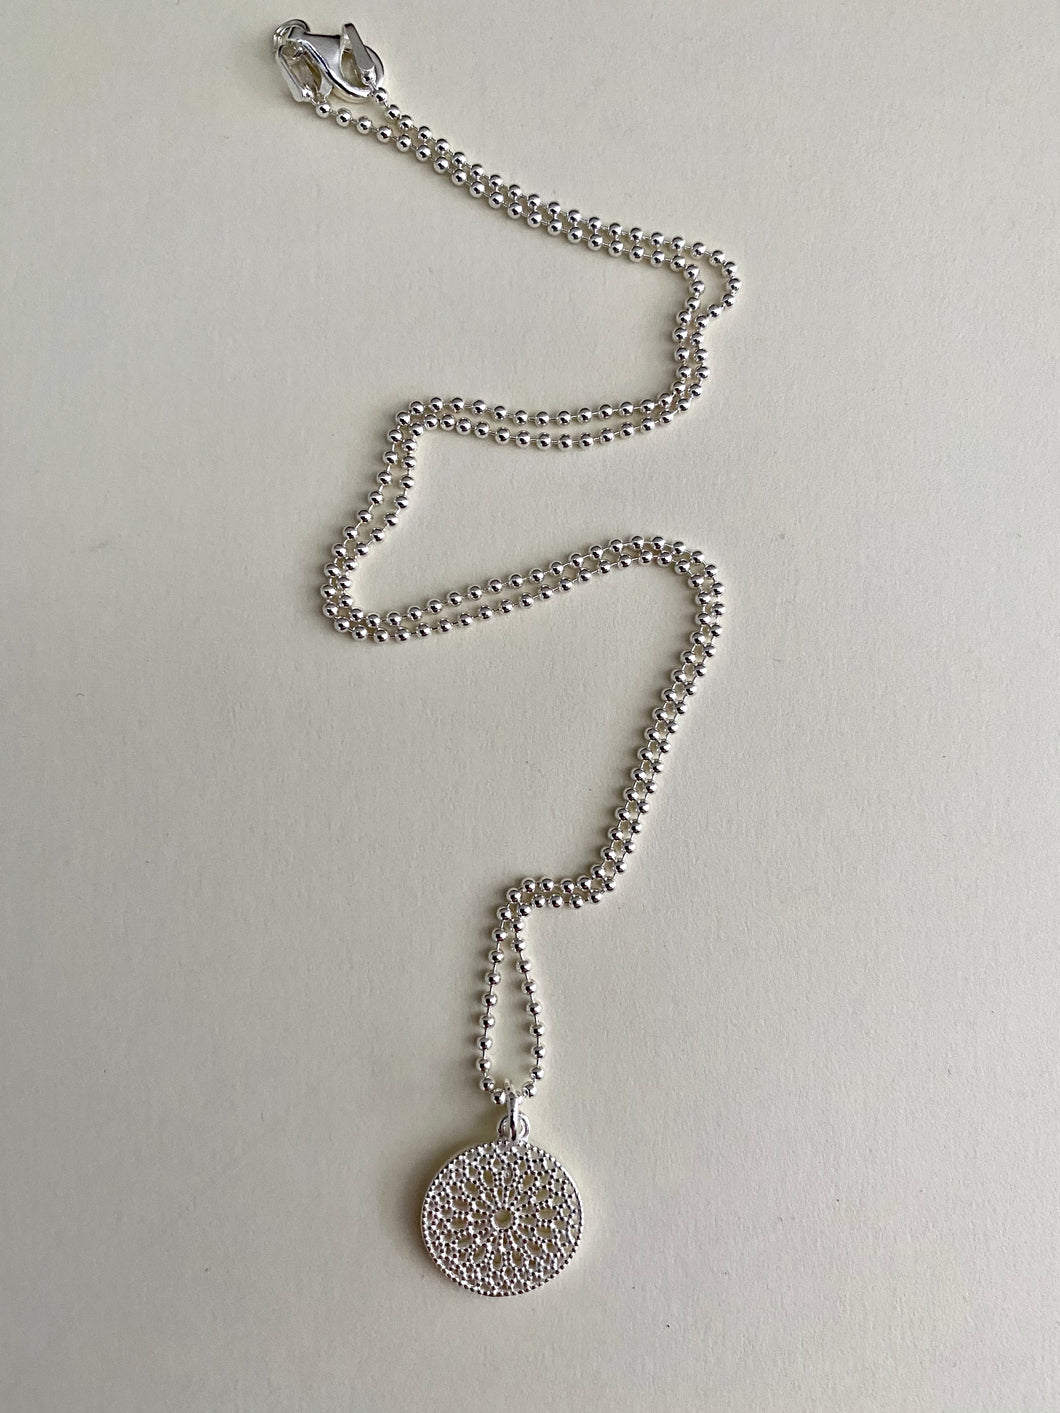 The silver Mandala Necklace